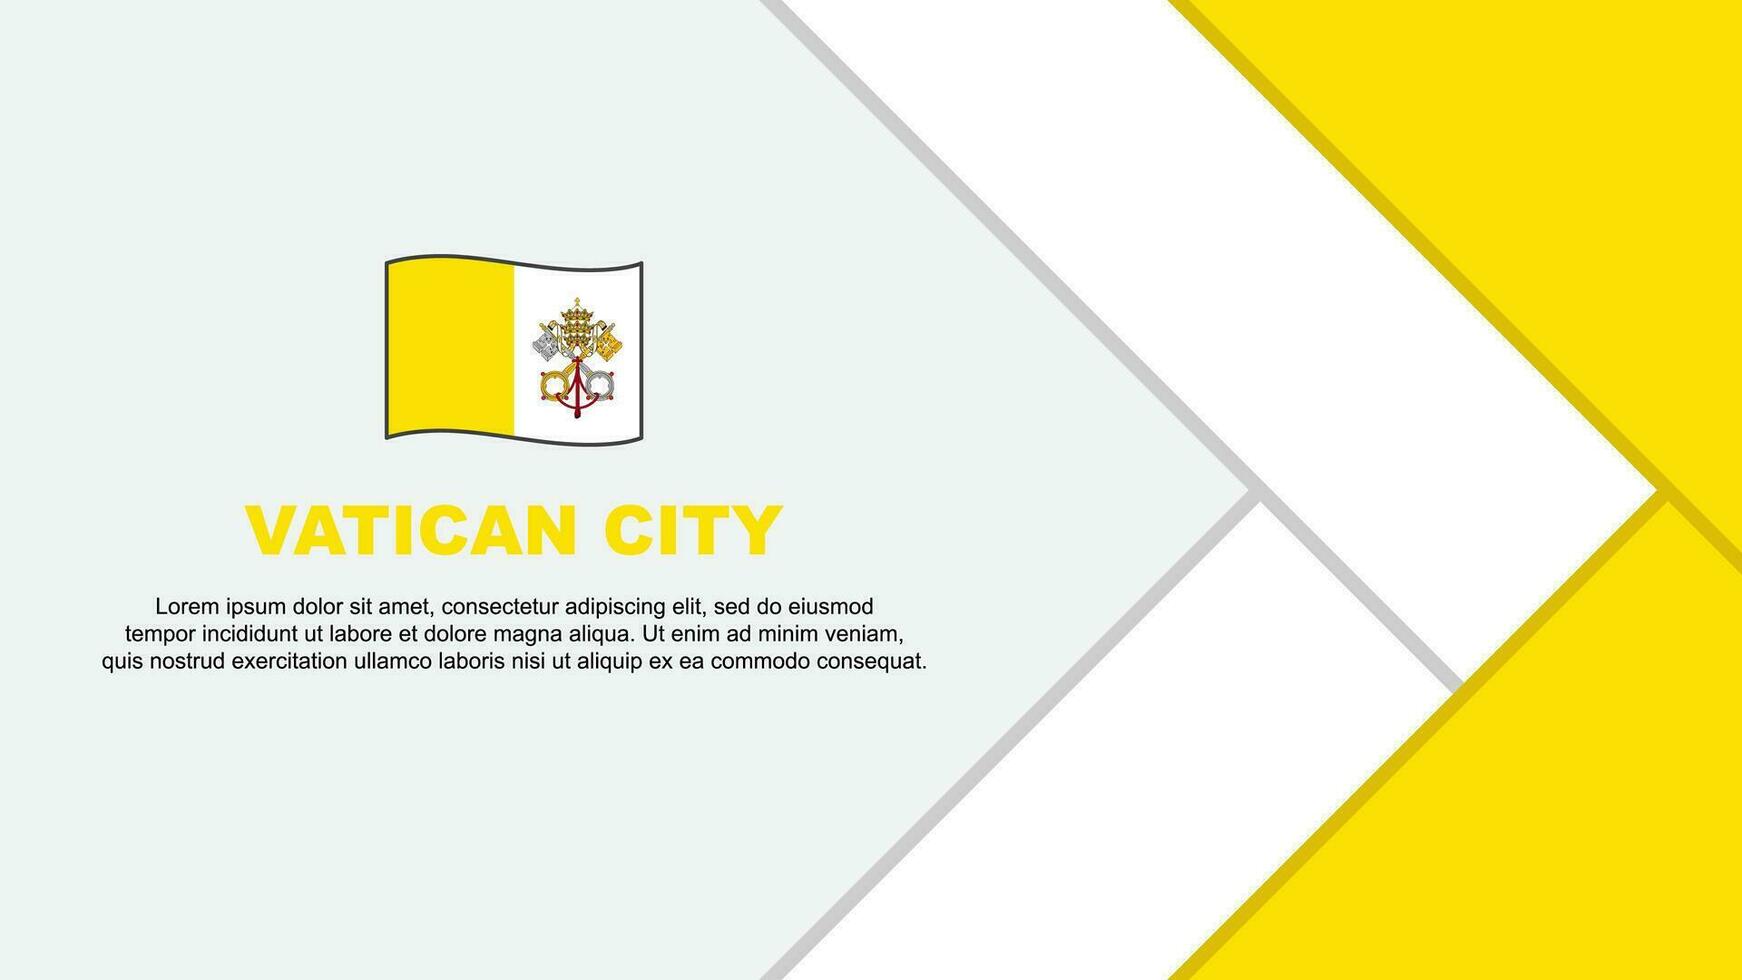 Vatican City Flag Abstract Background Design Template. Vatican City Independence Day Banner Cartoon Vector Illustration. Vatican City Template